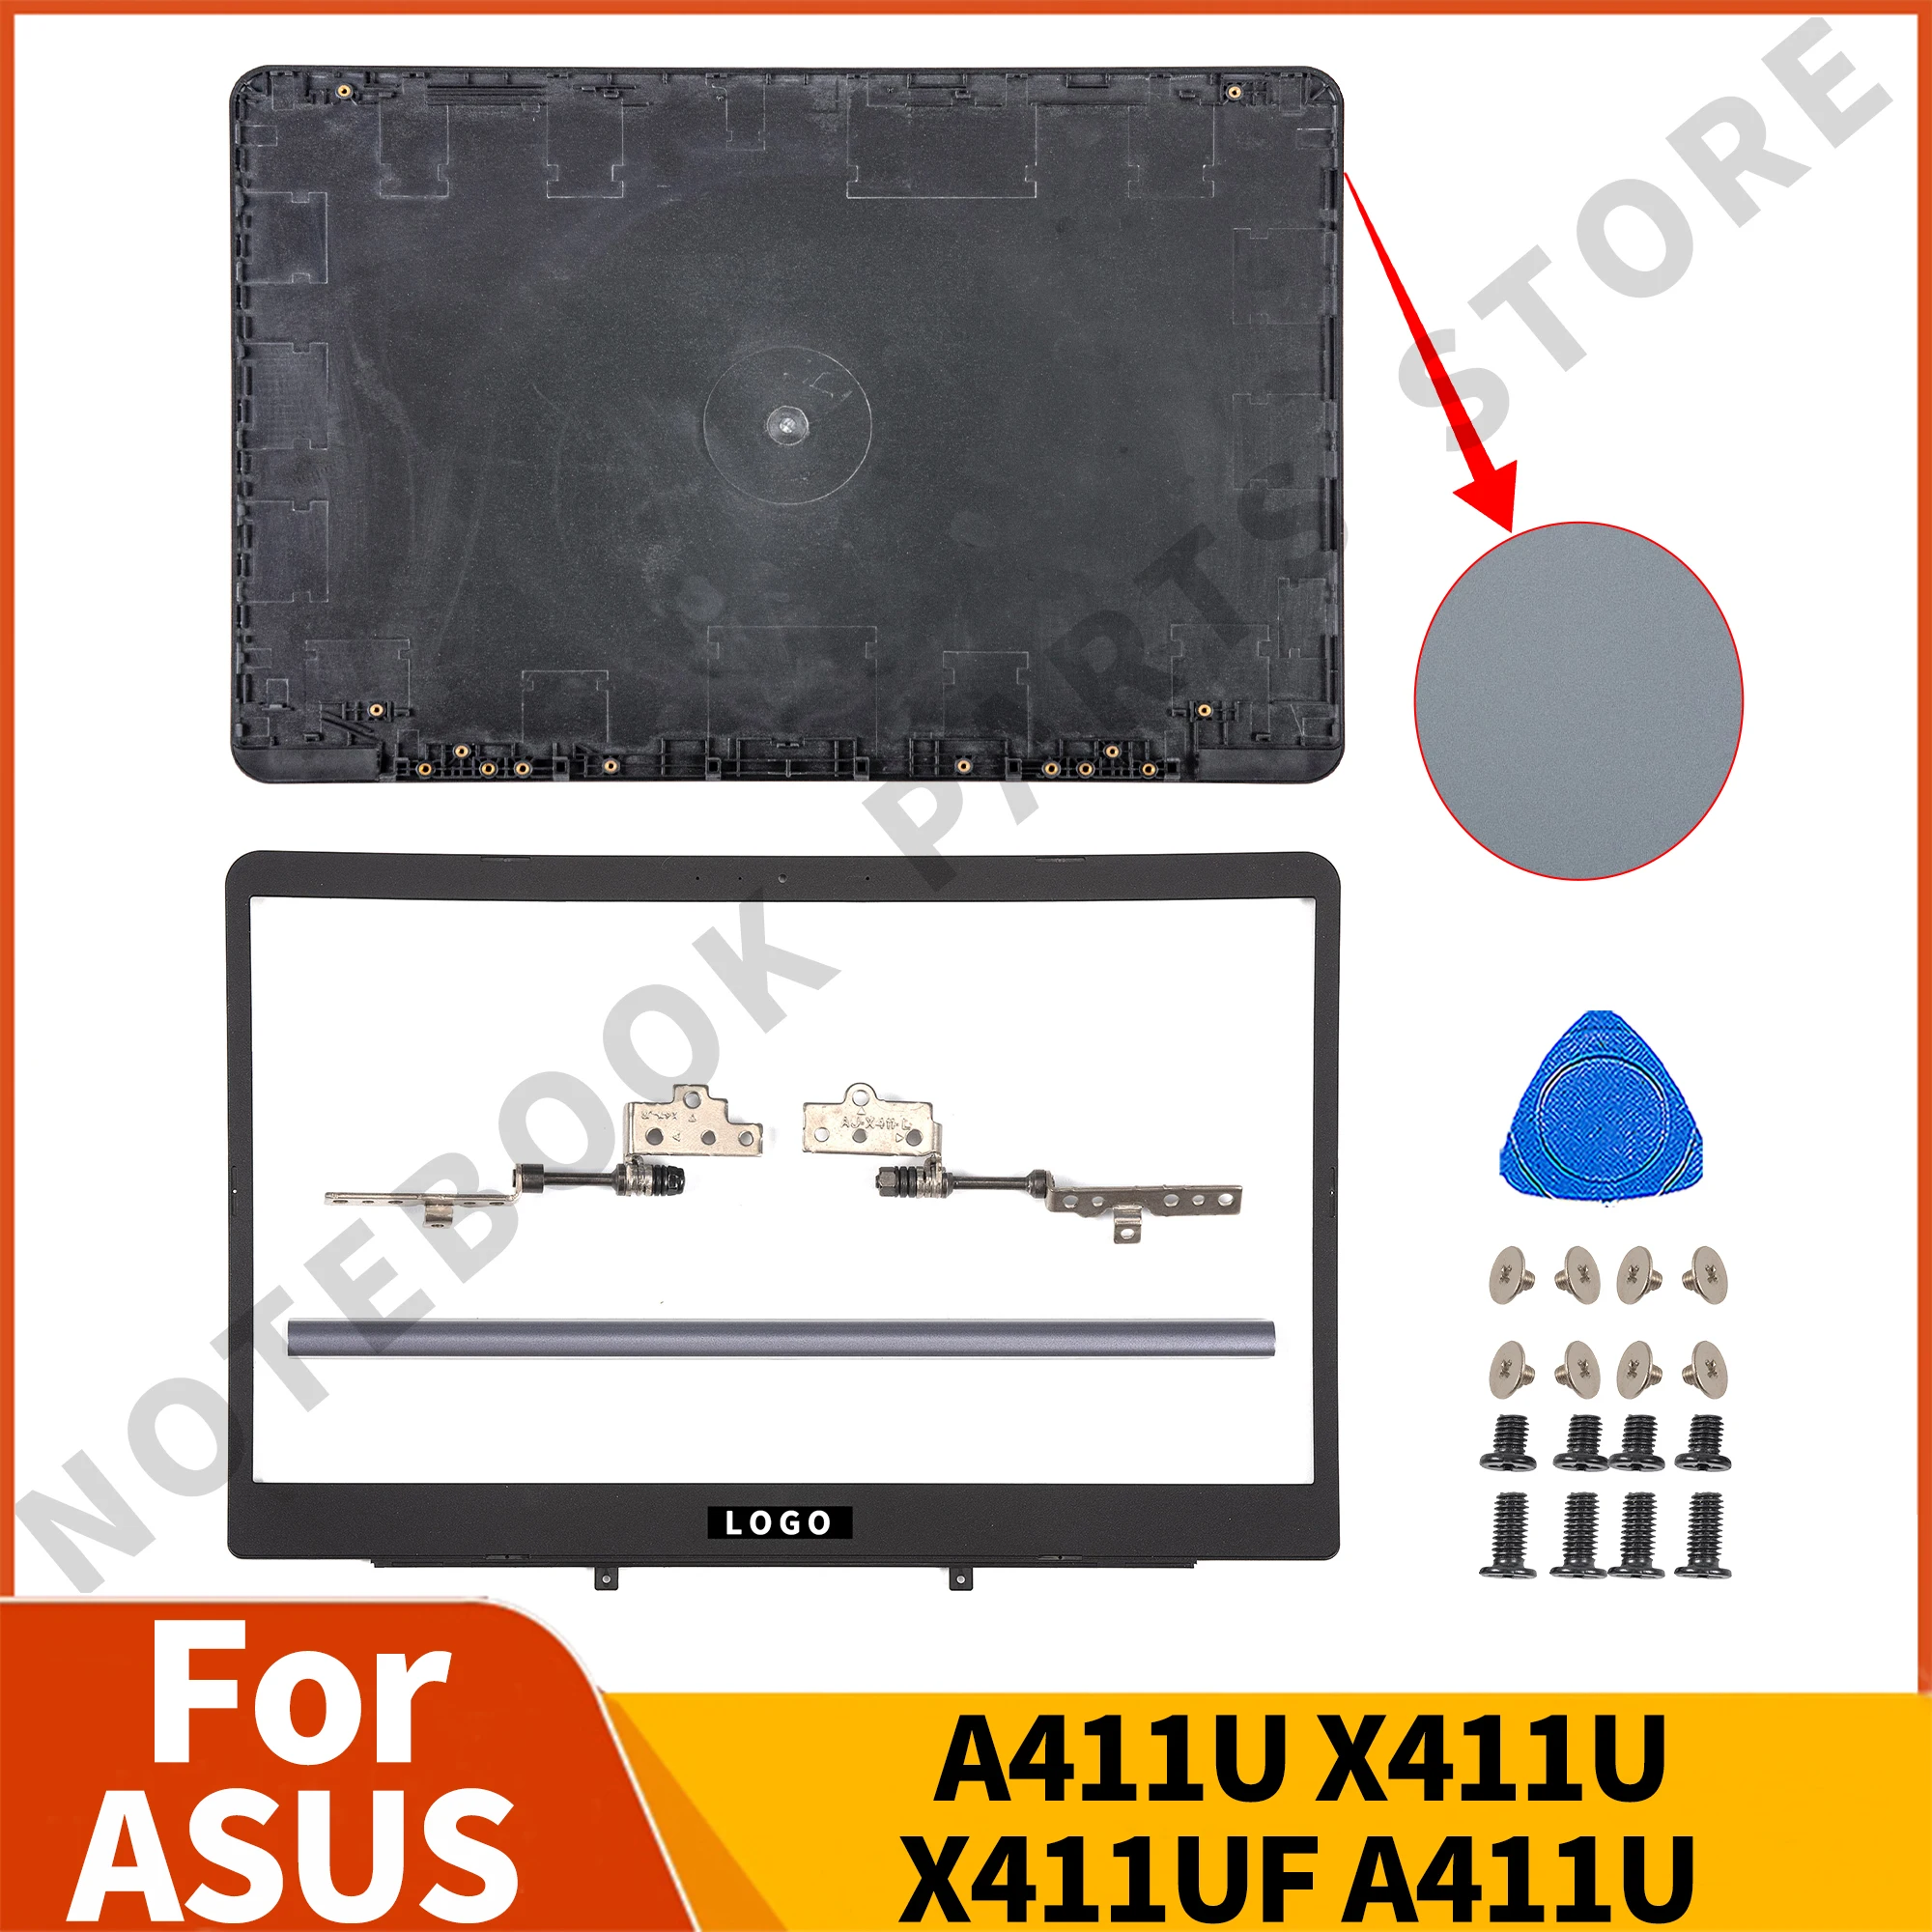 

New Laptop Parts LCD Back Cover For ASUS A411U X411U Front Bezel Hinges Hinge Cover Gray Lid Top Case Replacement Plastic